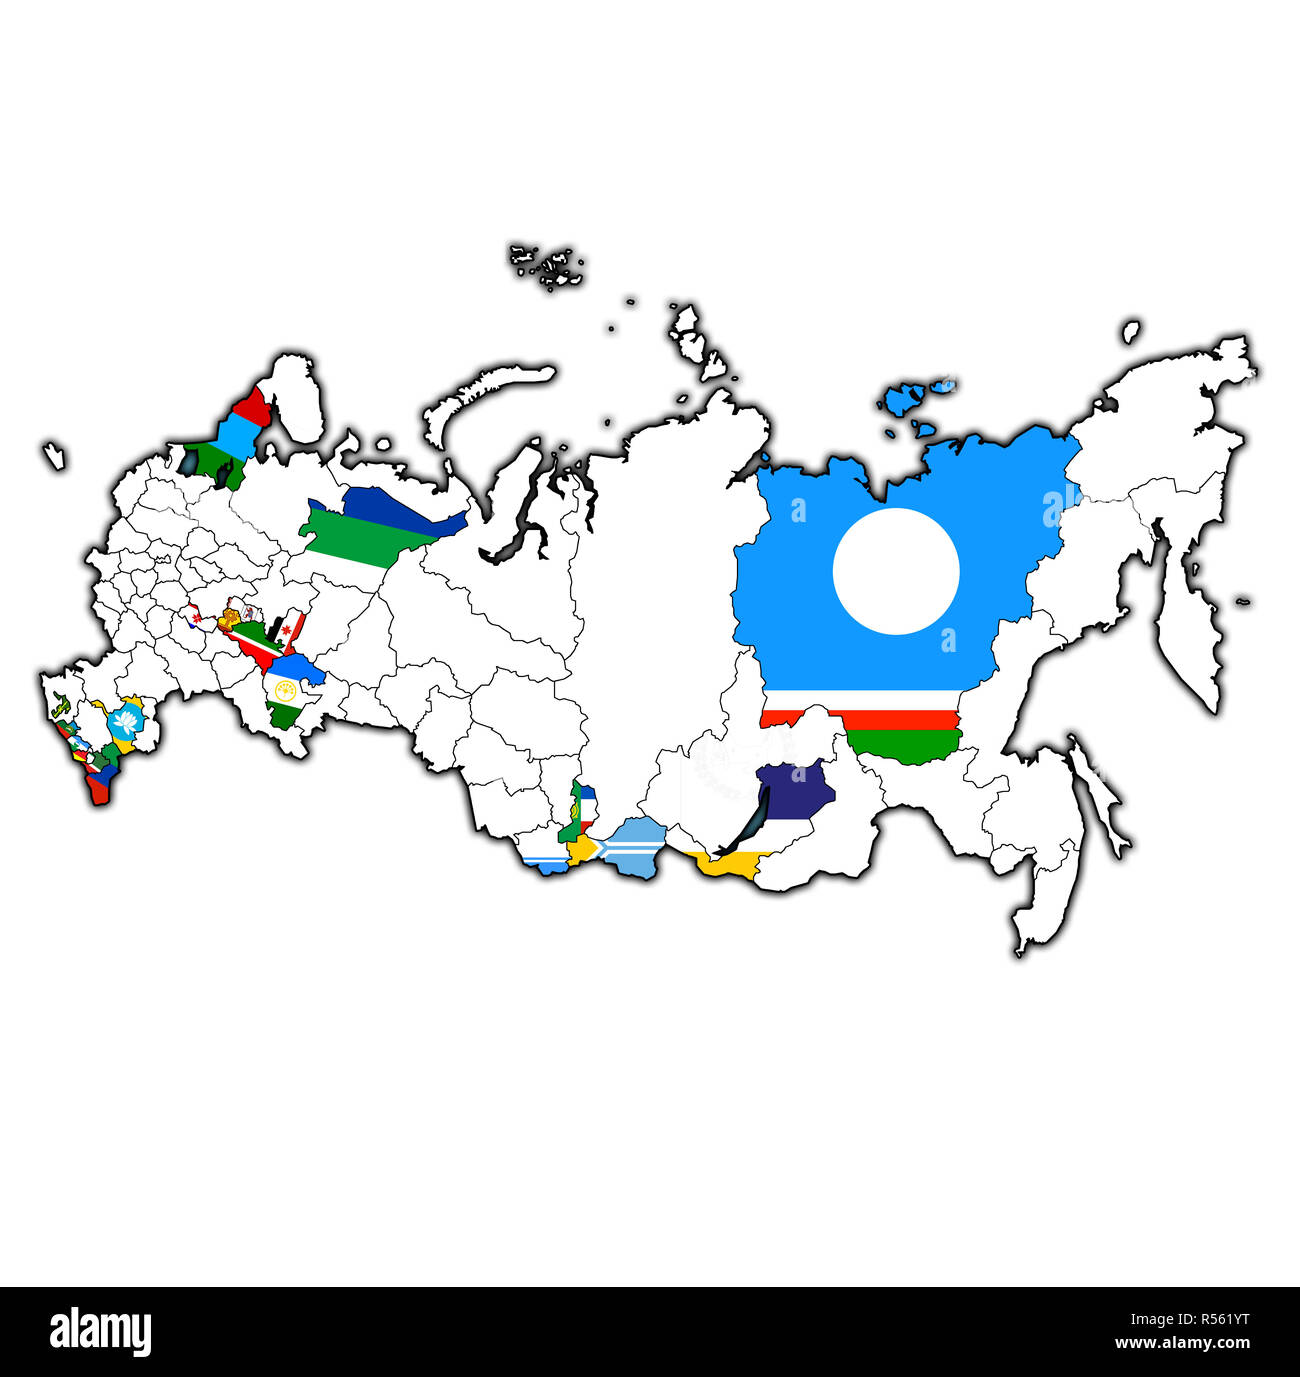 emblems republics on map with administrative divisions and borders of russia Stock Photo